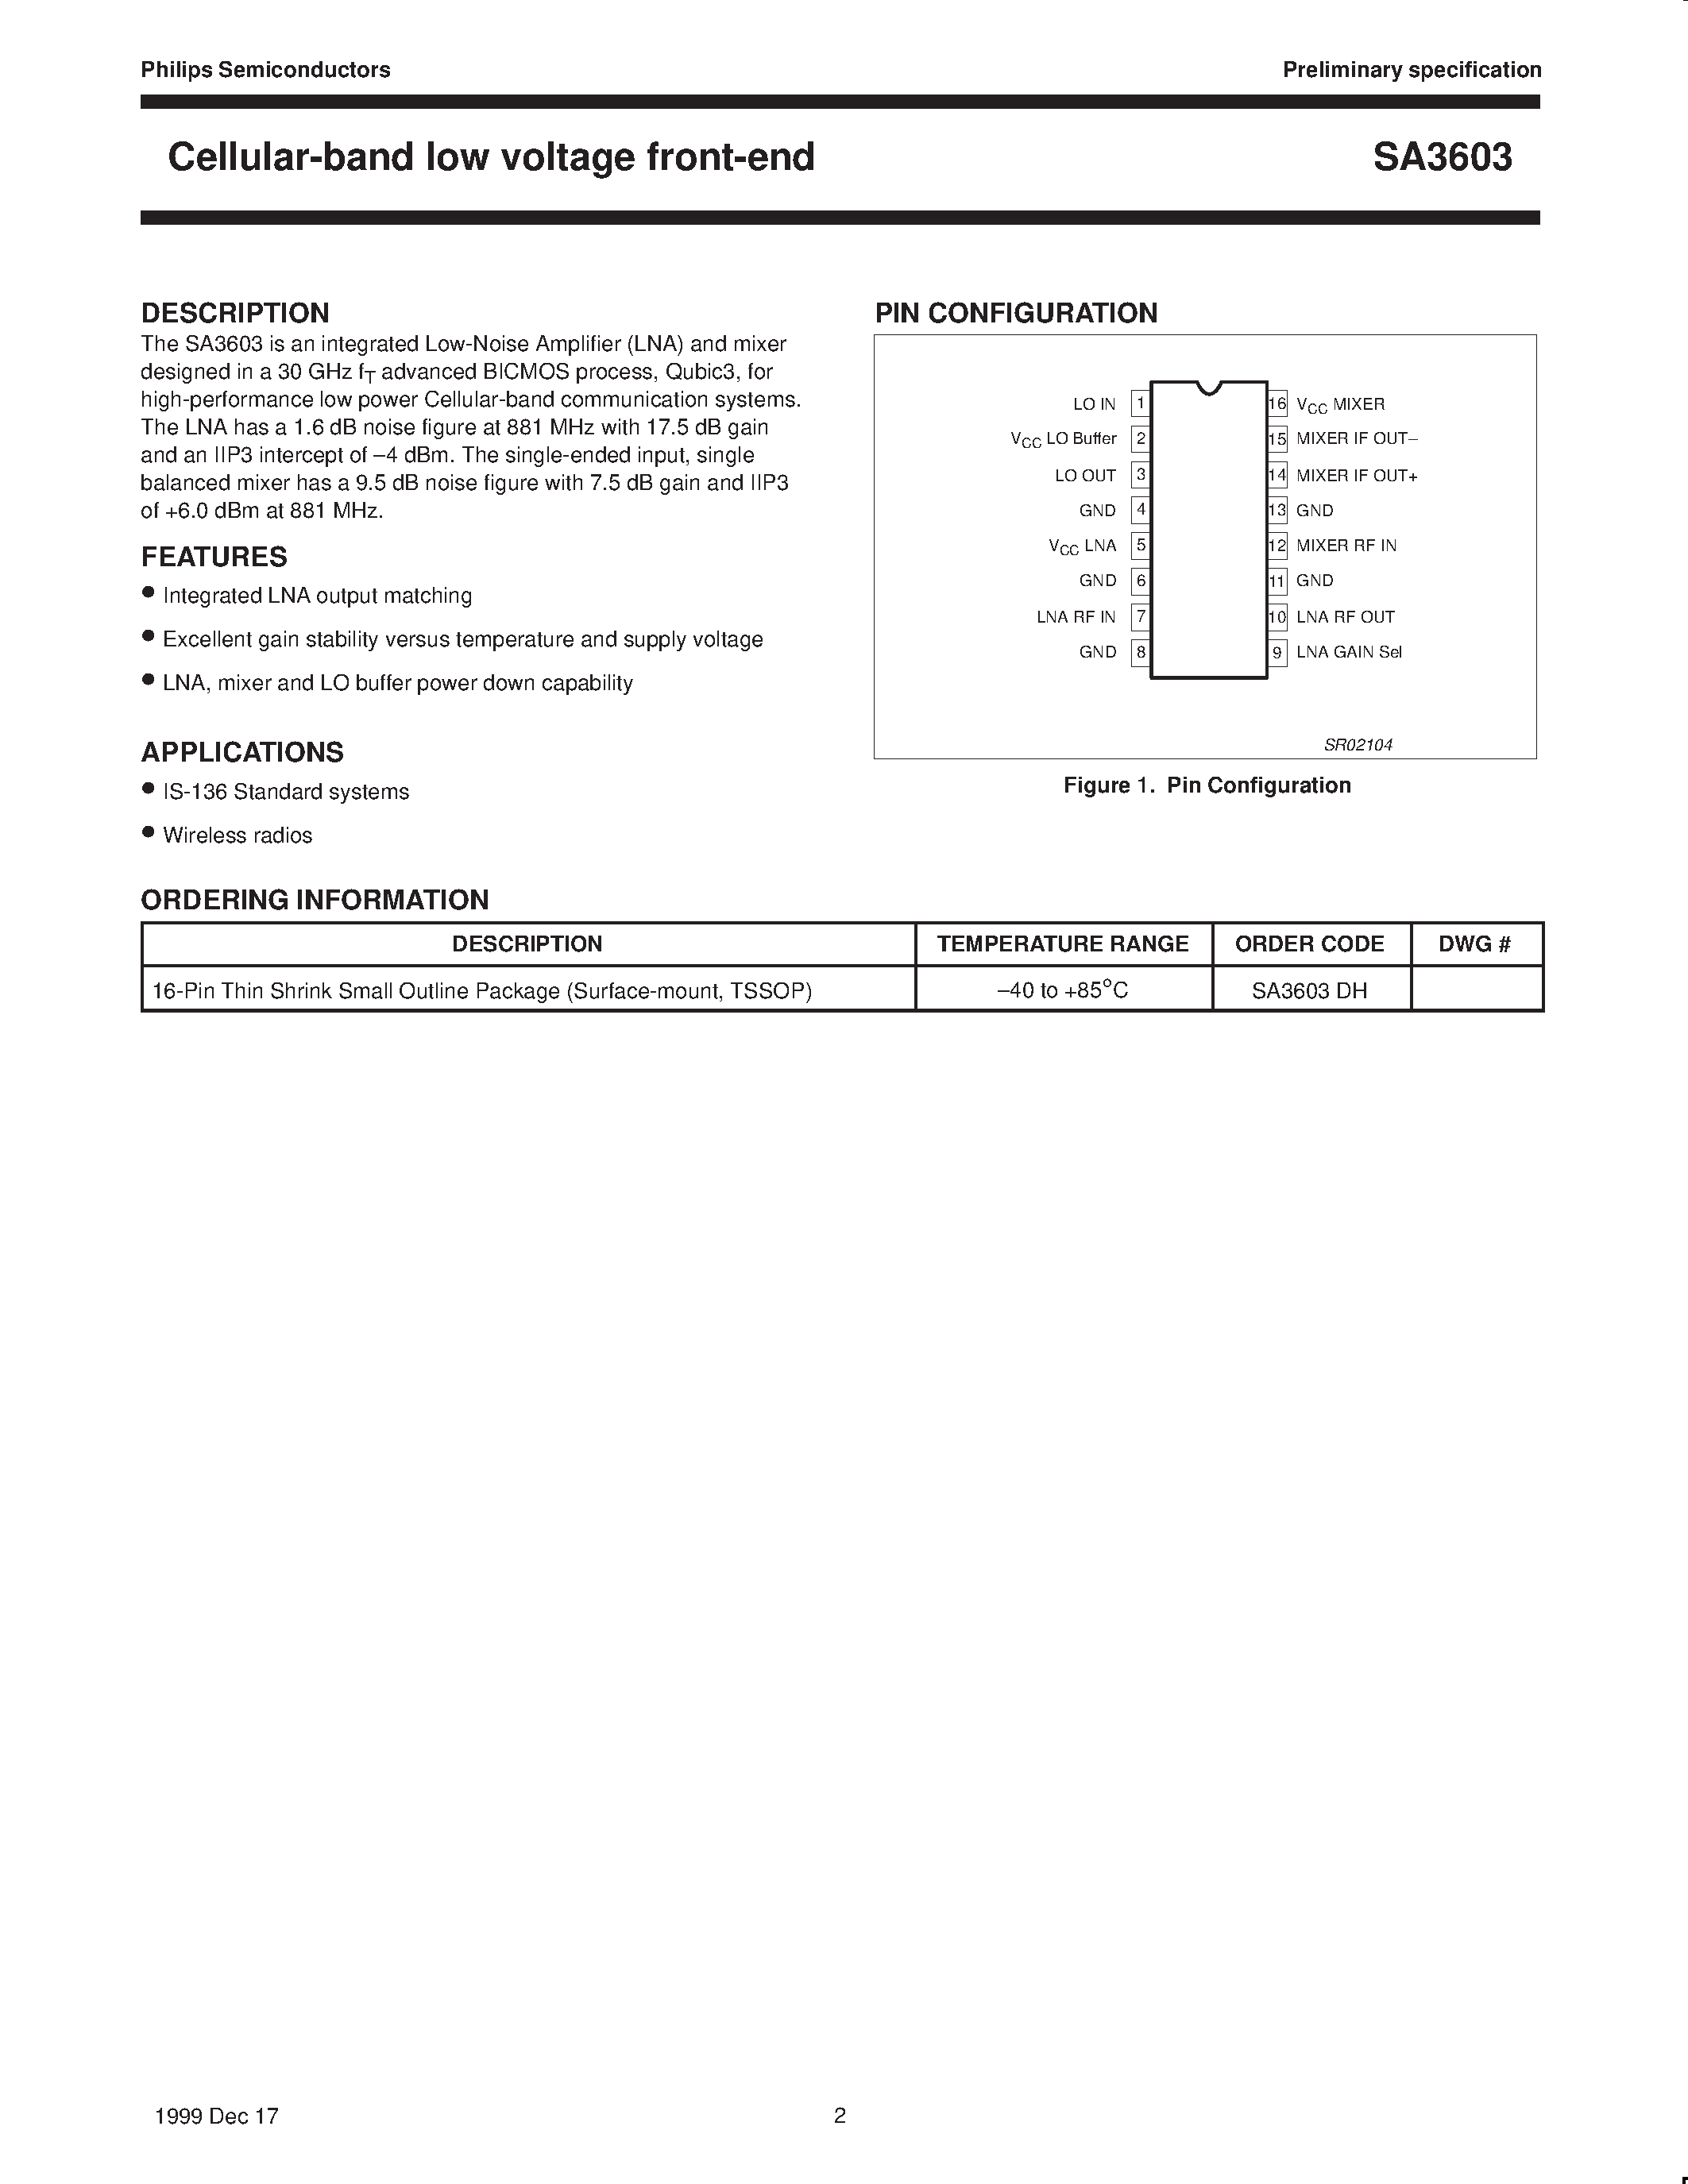 Datasheet SA3603DH - Cellular-band low voltage front-end page 2